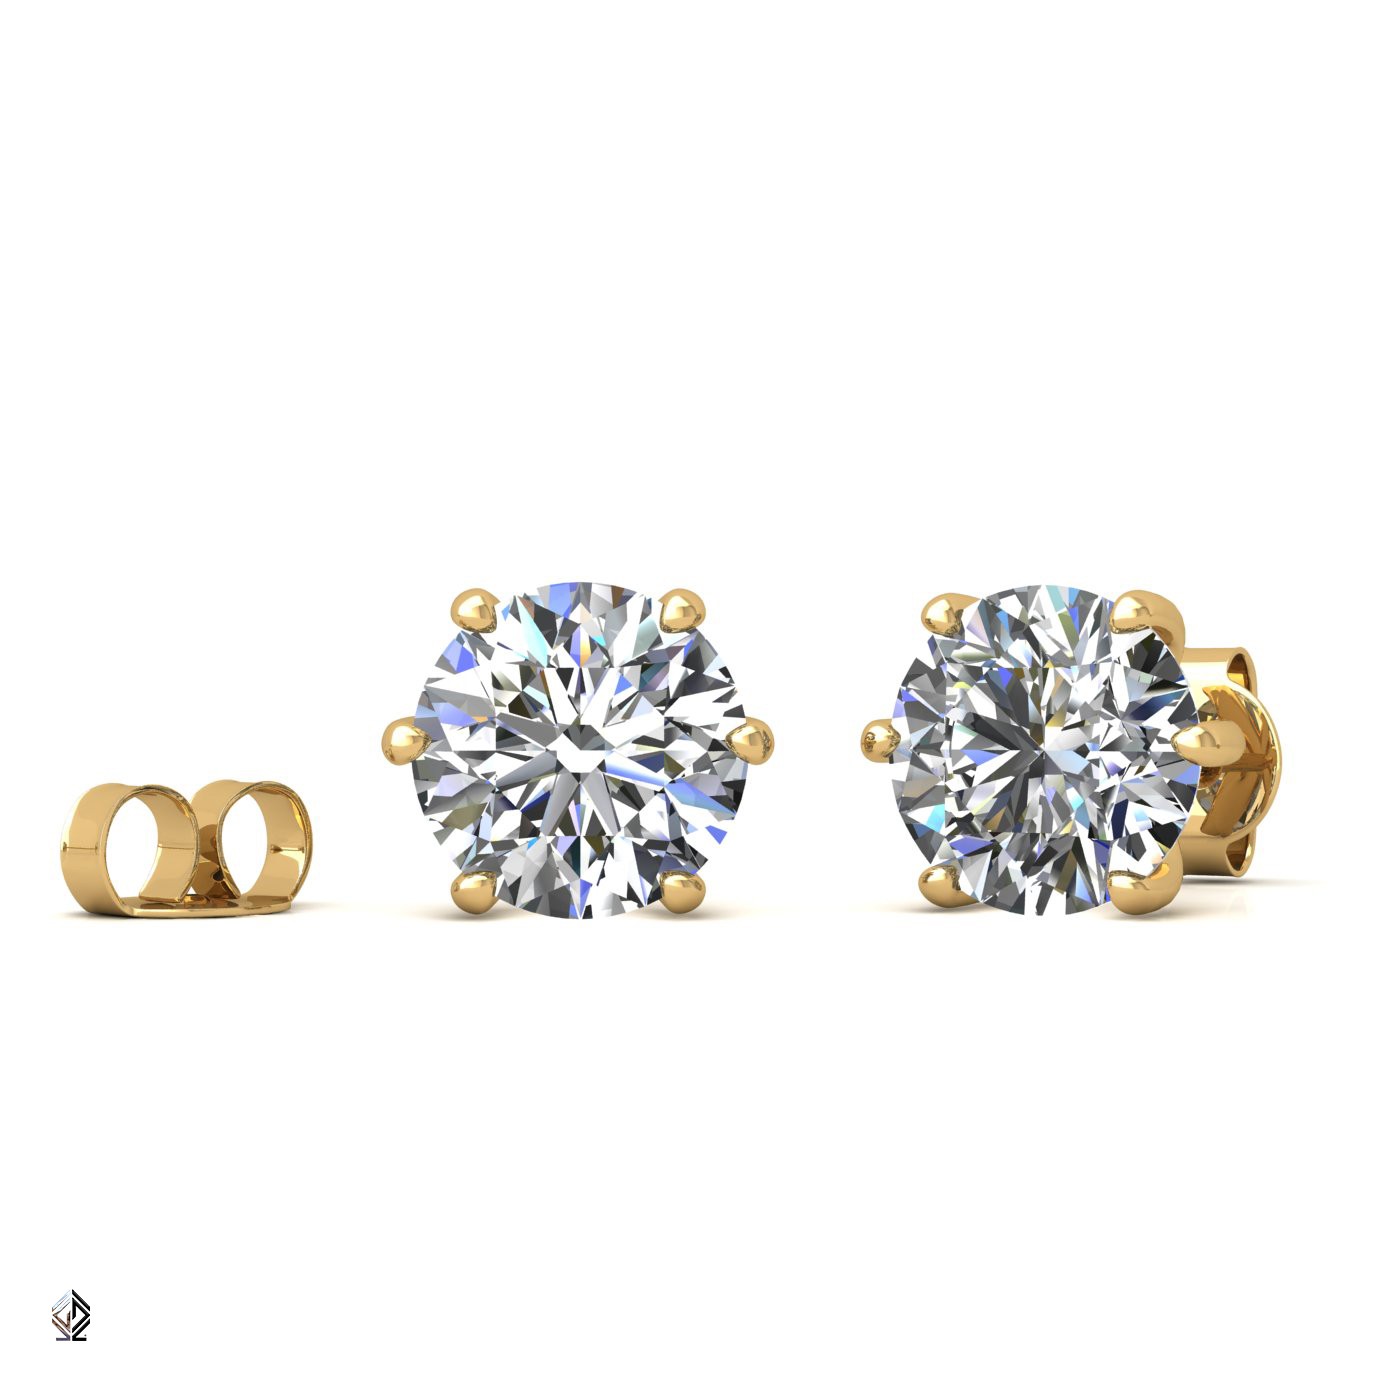 18k yellow gold 2.5 ct each (5,0 tcw) 6 prongs round shape diamond earrings Photos & images